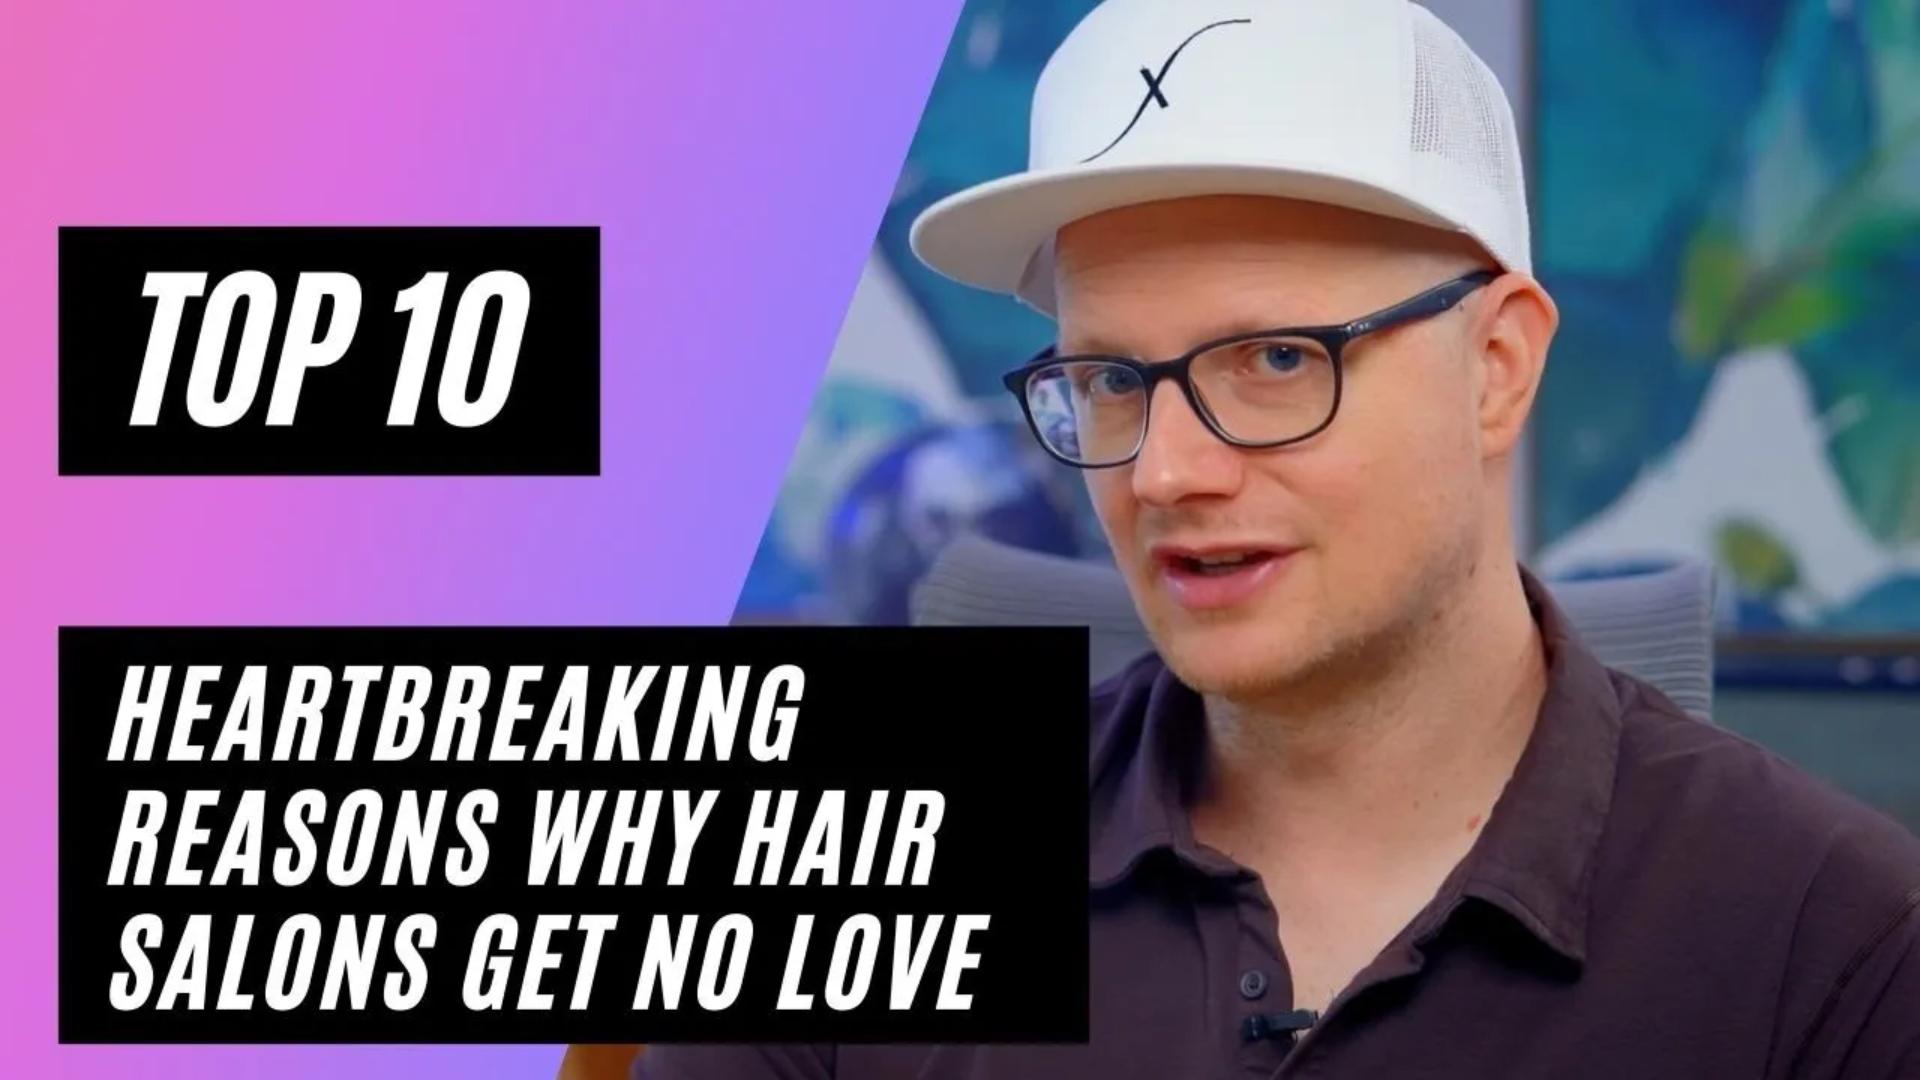 Top 10 Heartbreaking Reasons Why Hair Salons Get No Love